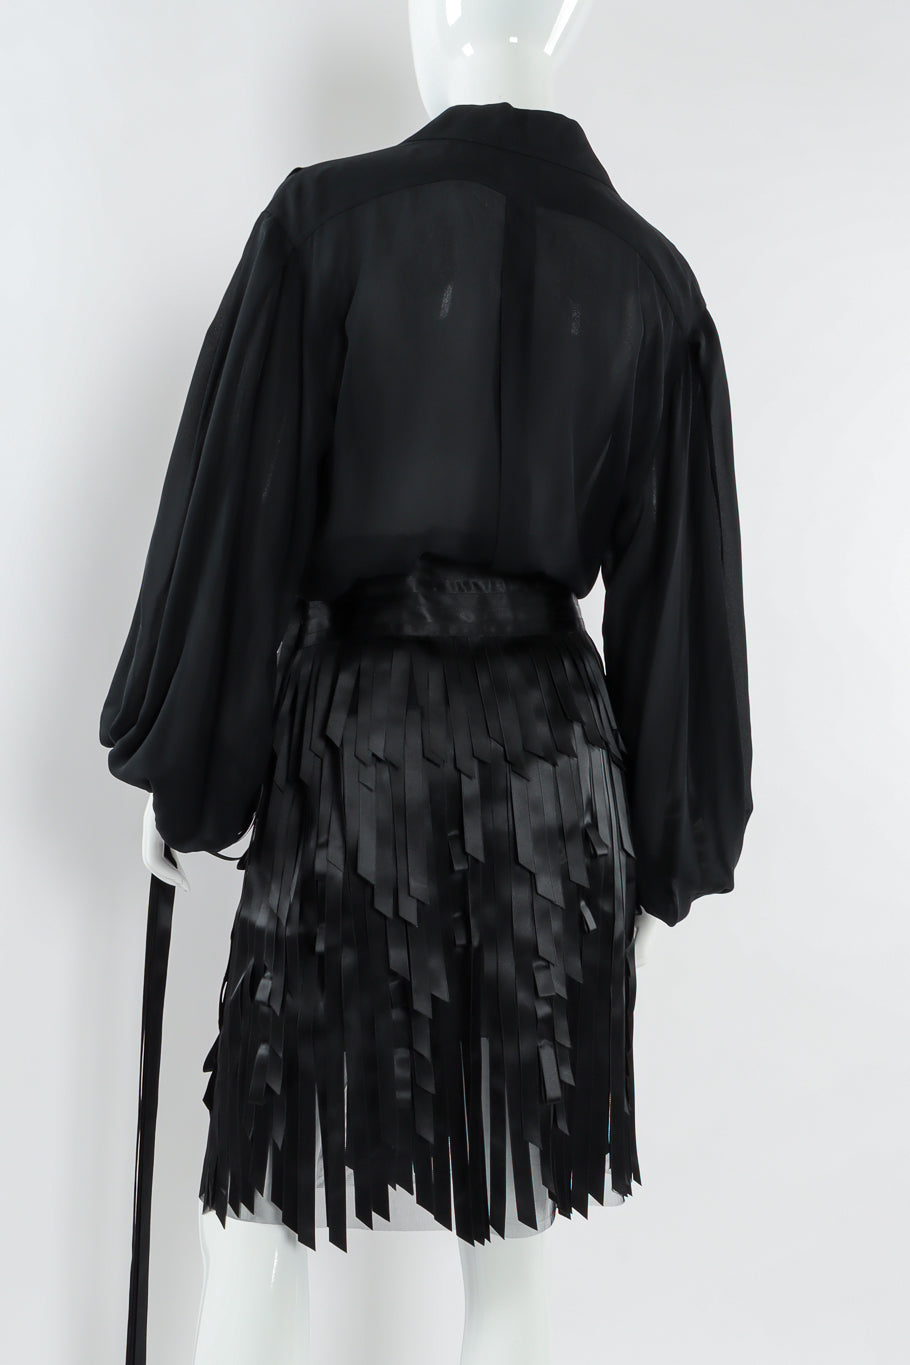 Vintage Chanel Pleated Sheer Silk Blouse mannequin back full close @ Recess LA